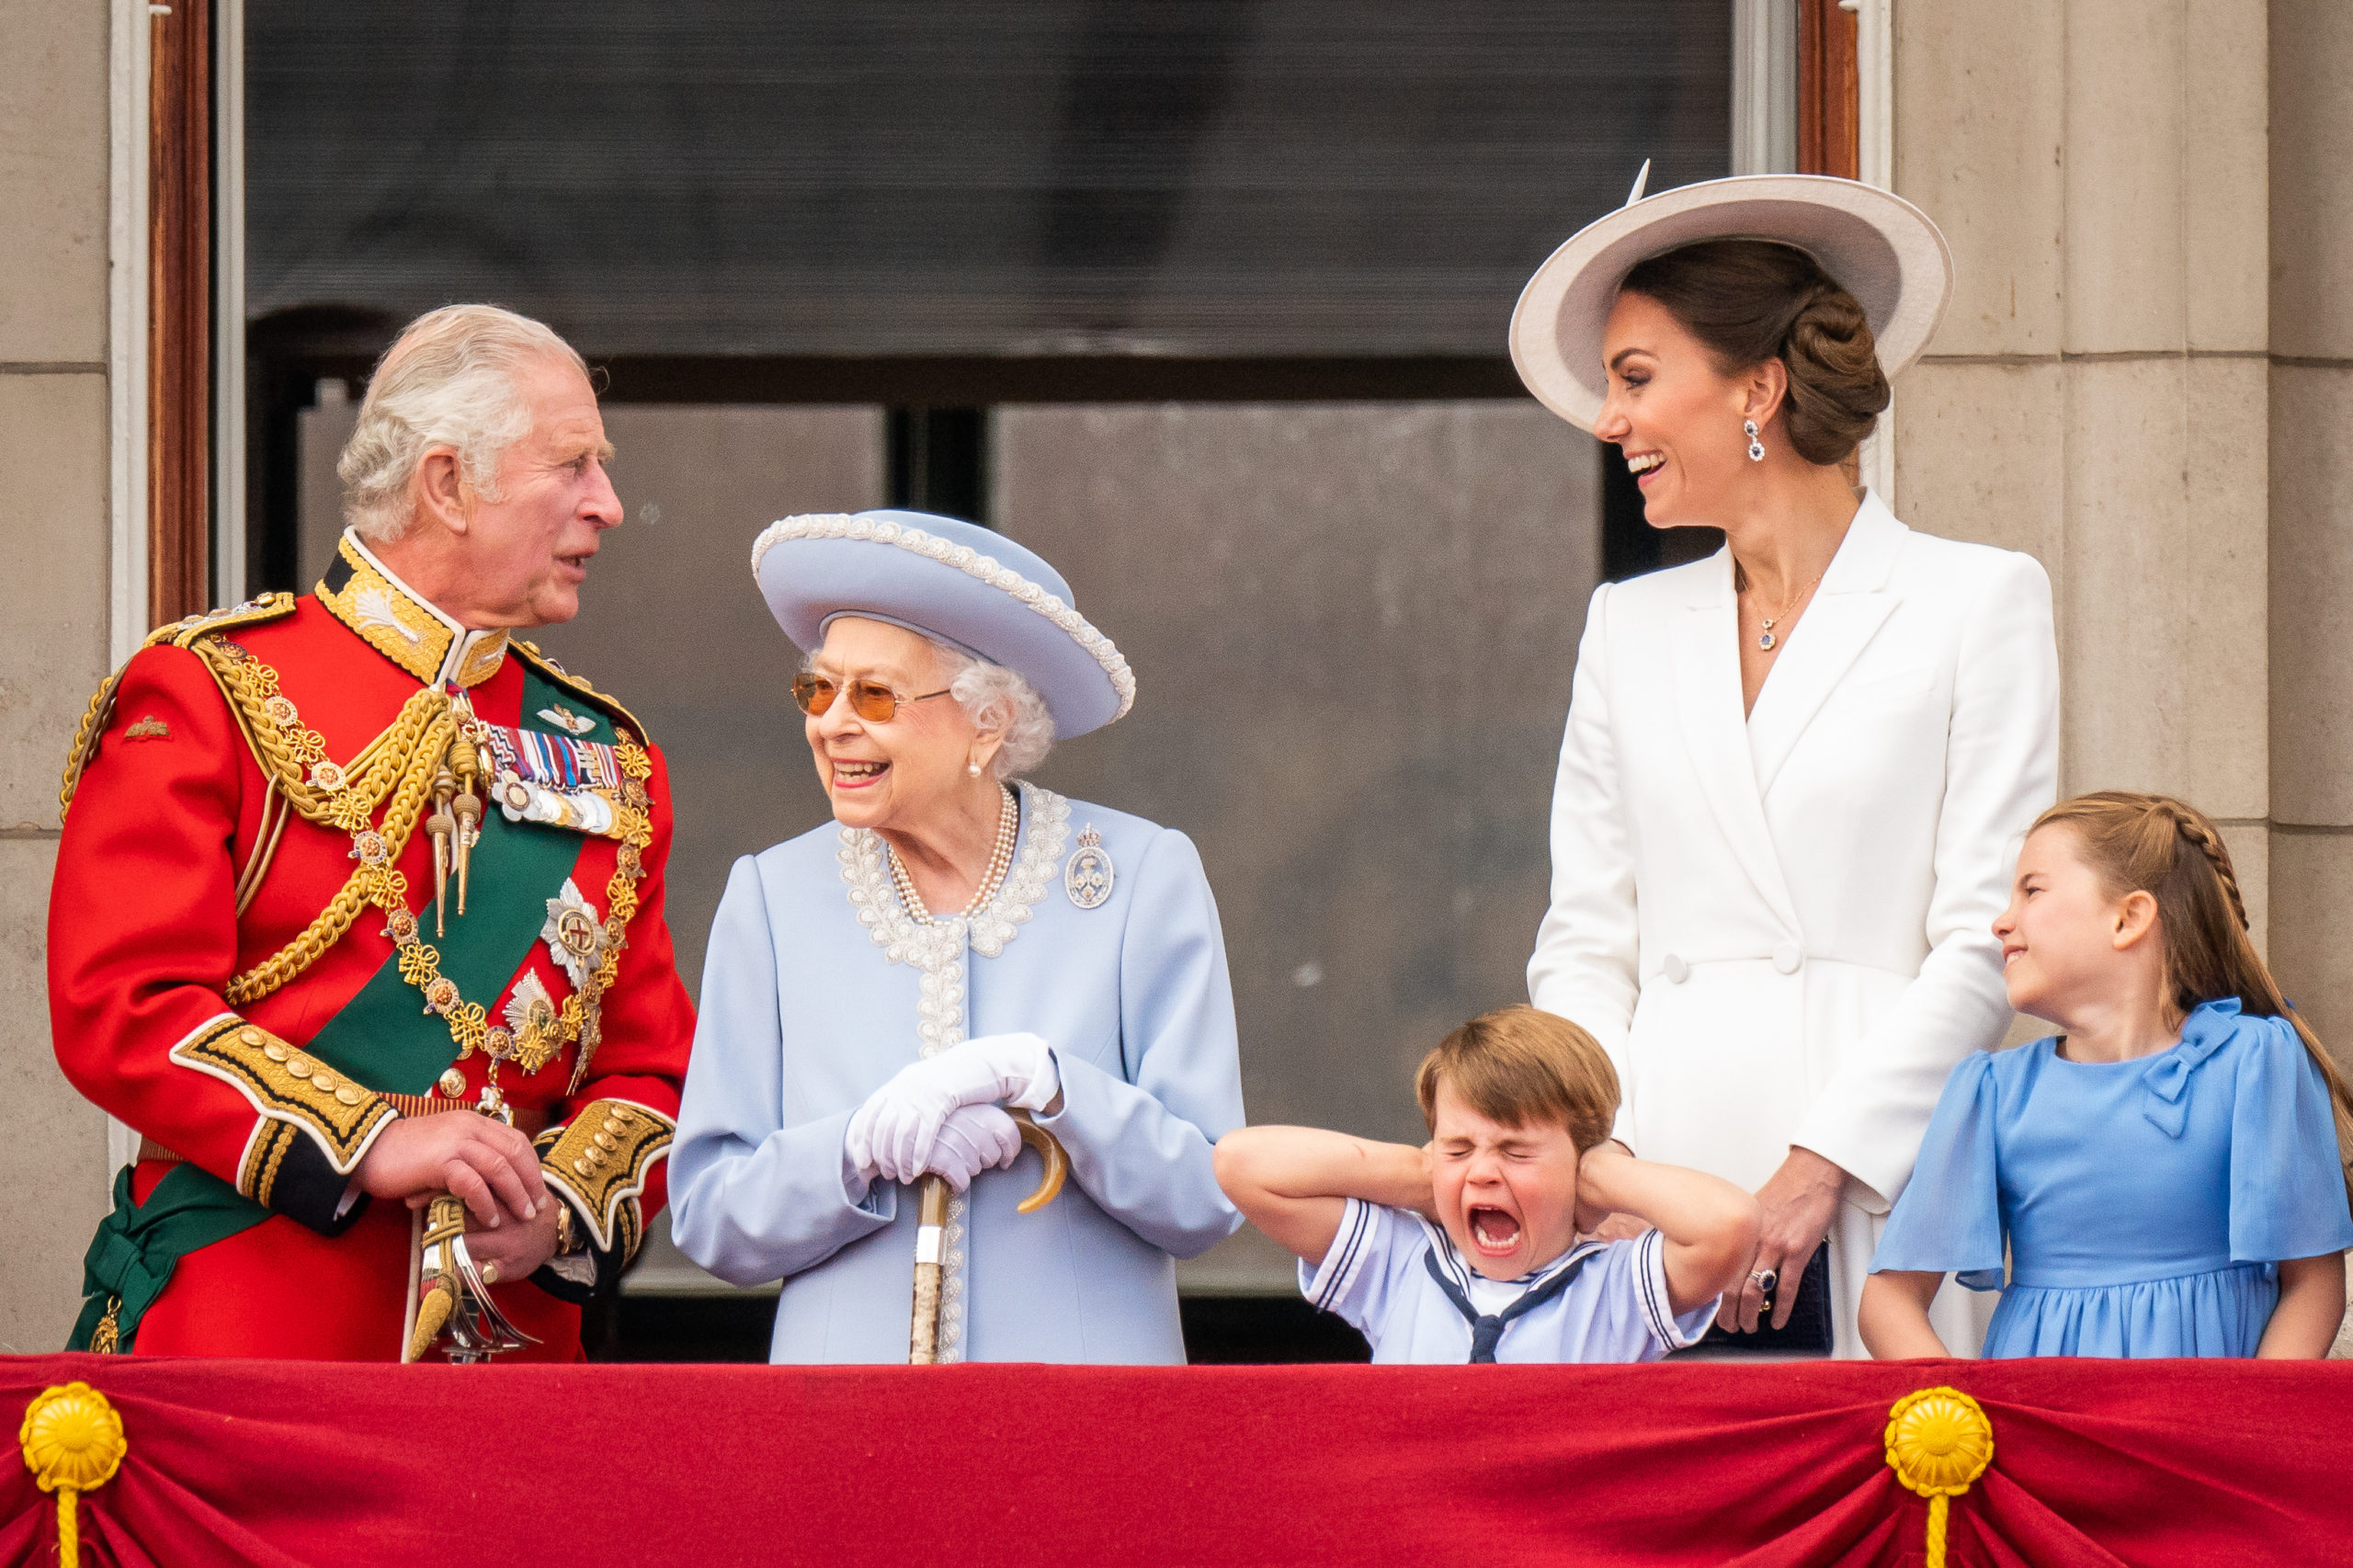 PA REVIEW OF THE YEAR 2022 File photo dated 02/06/22 - The Prince of Wales, Queen Elizabeth II, Prince Louis, the Duchess of Cambridge and Princess Charlotte on the balcony of Buckingham Palace after the Trooping the Colour ceremony at Horse Guards Parade, central London, as the Queen celebrates her official birthday, on day one of the Platinum Jubilee celebrations. Issue date: Tuesday December 20, 2022.. Photo credit should read: Aaron Chown/PA Wire